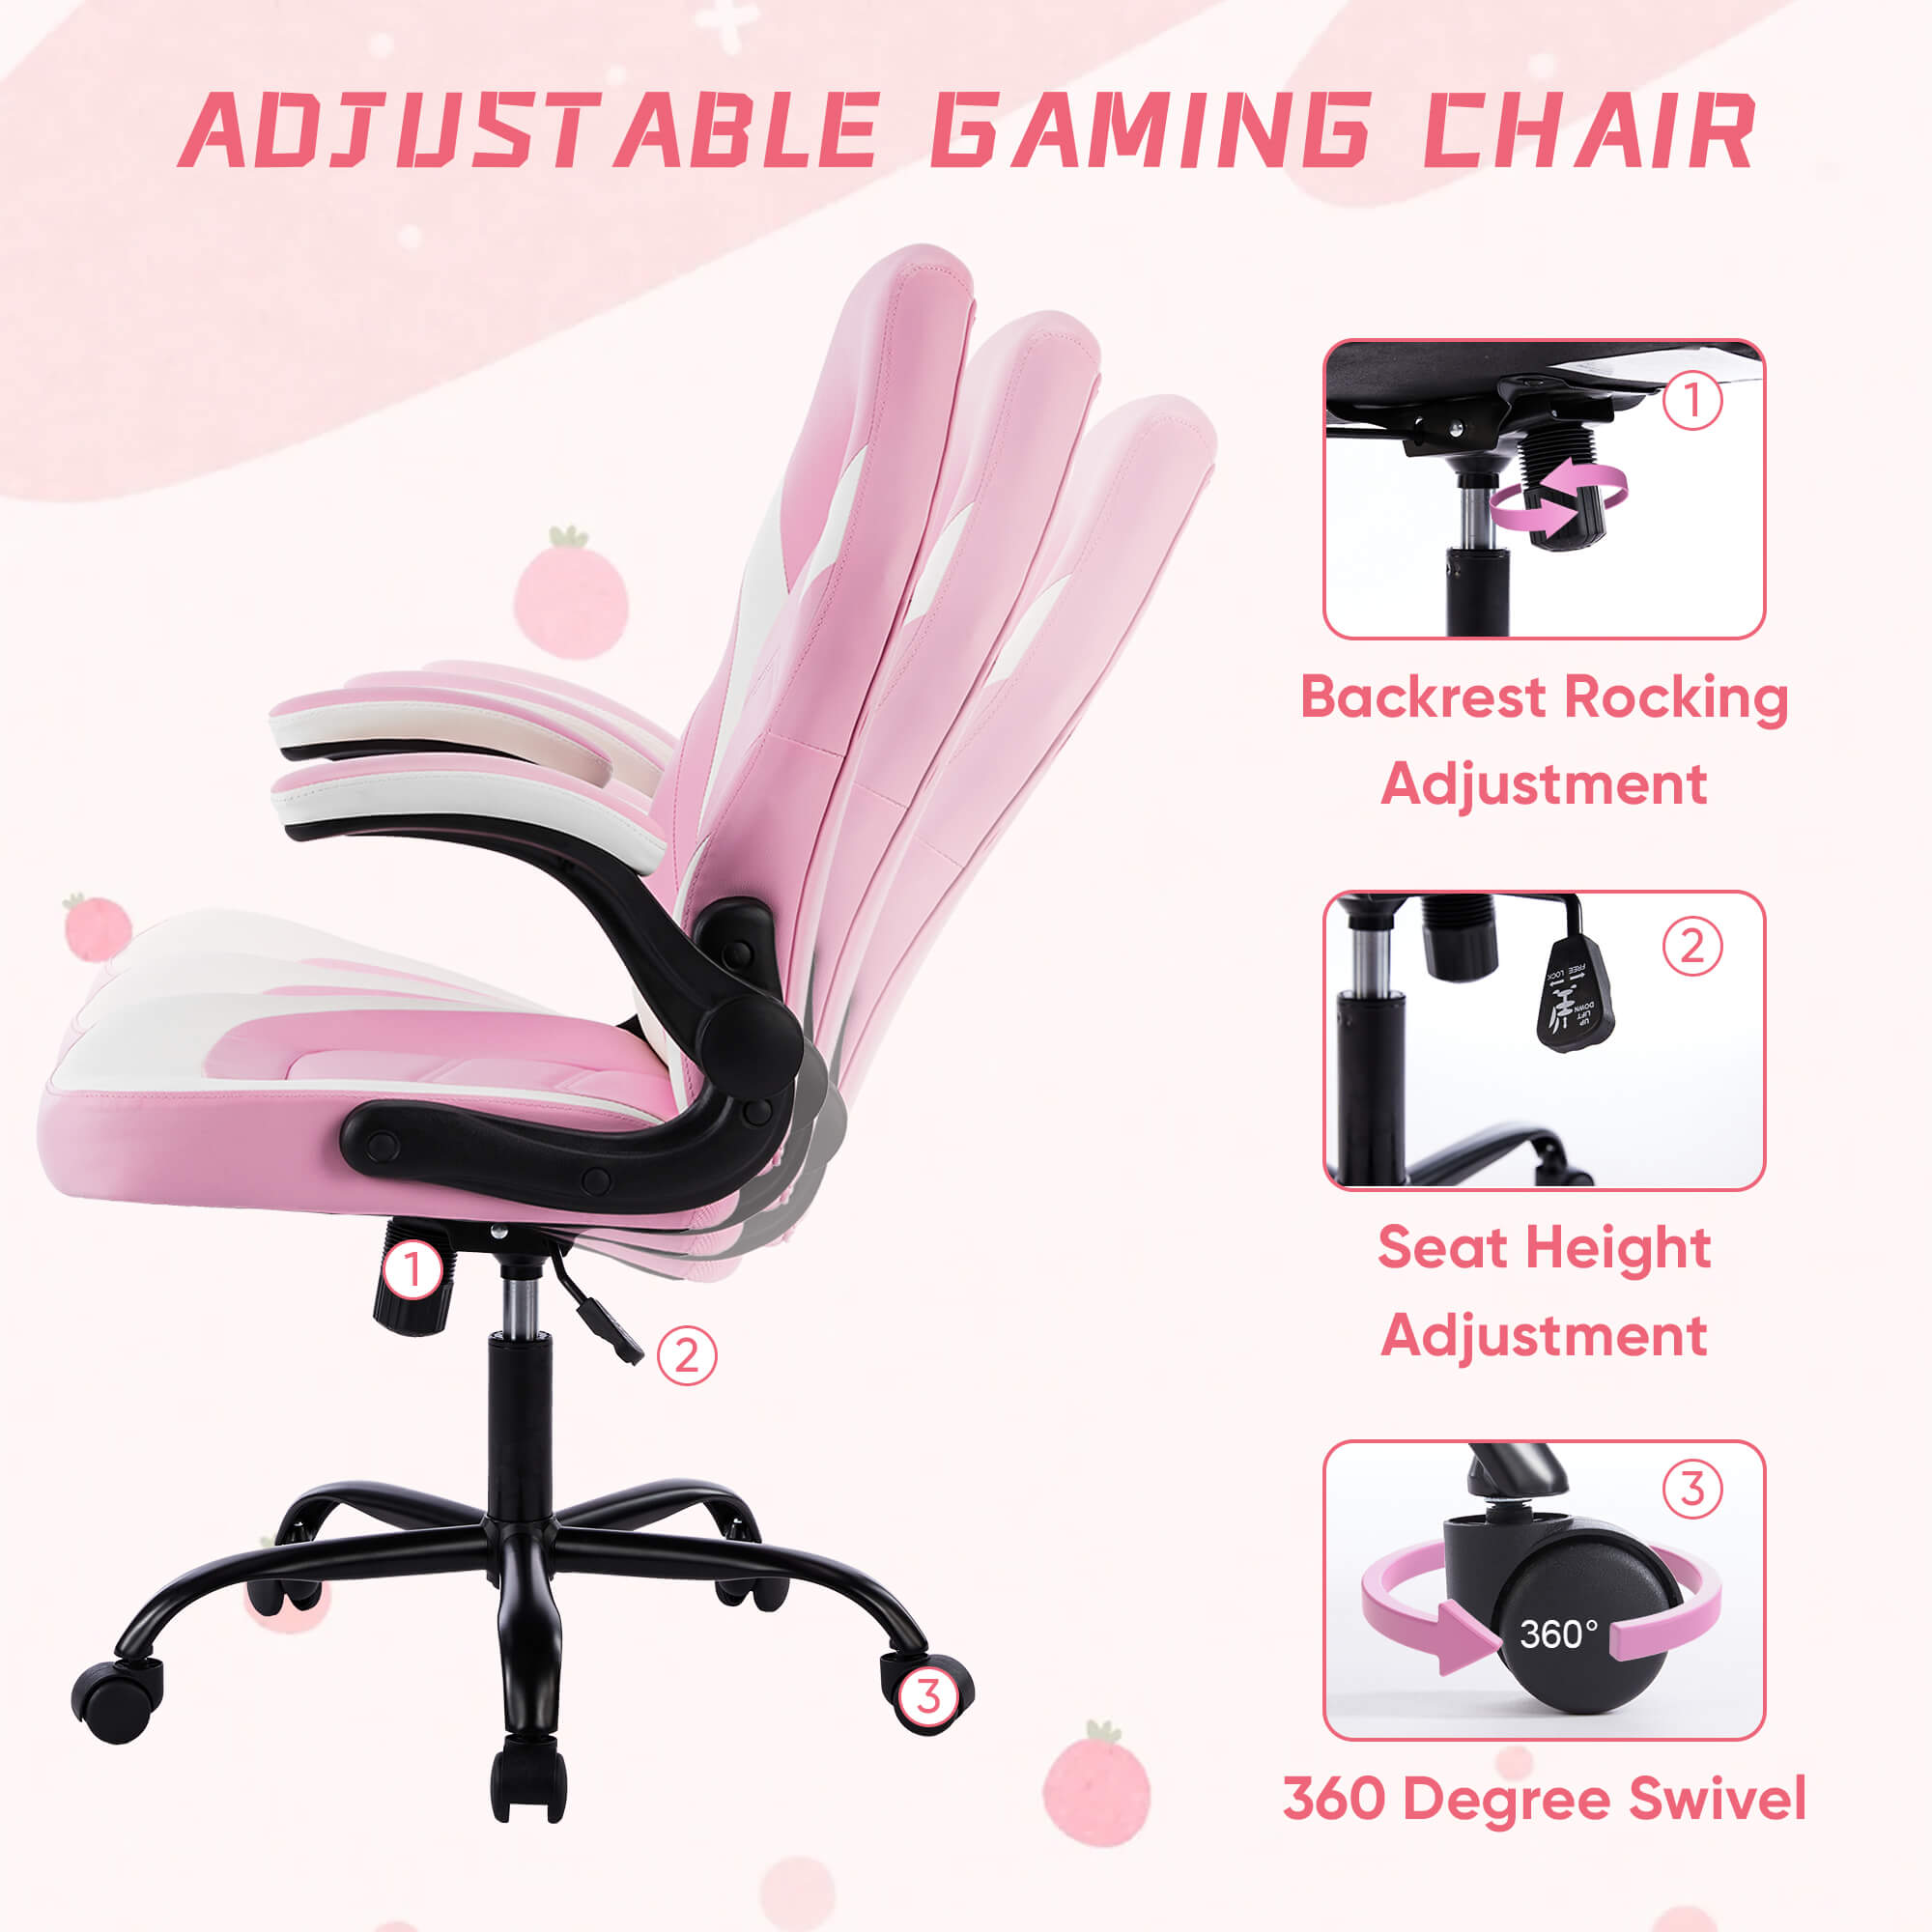 Ergonomic Leather Gaming Chair-Office Desk PU Leather Chair -up Armrests, Swivel Task Chair Adjustable Height for Adults Teens Kids